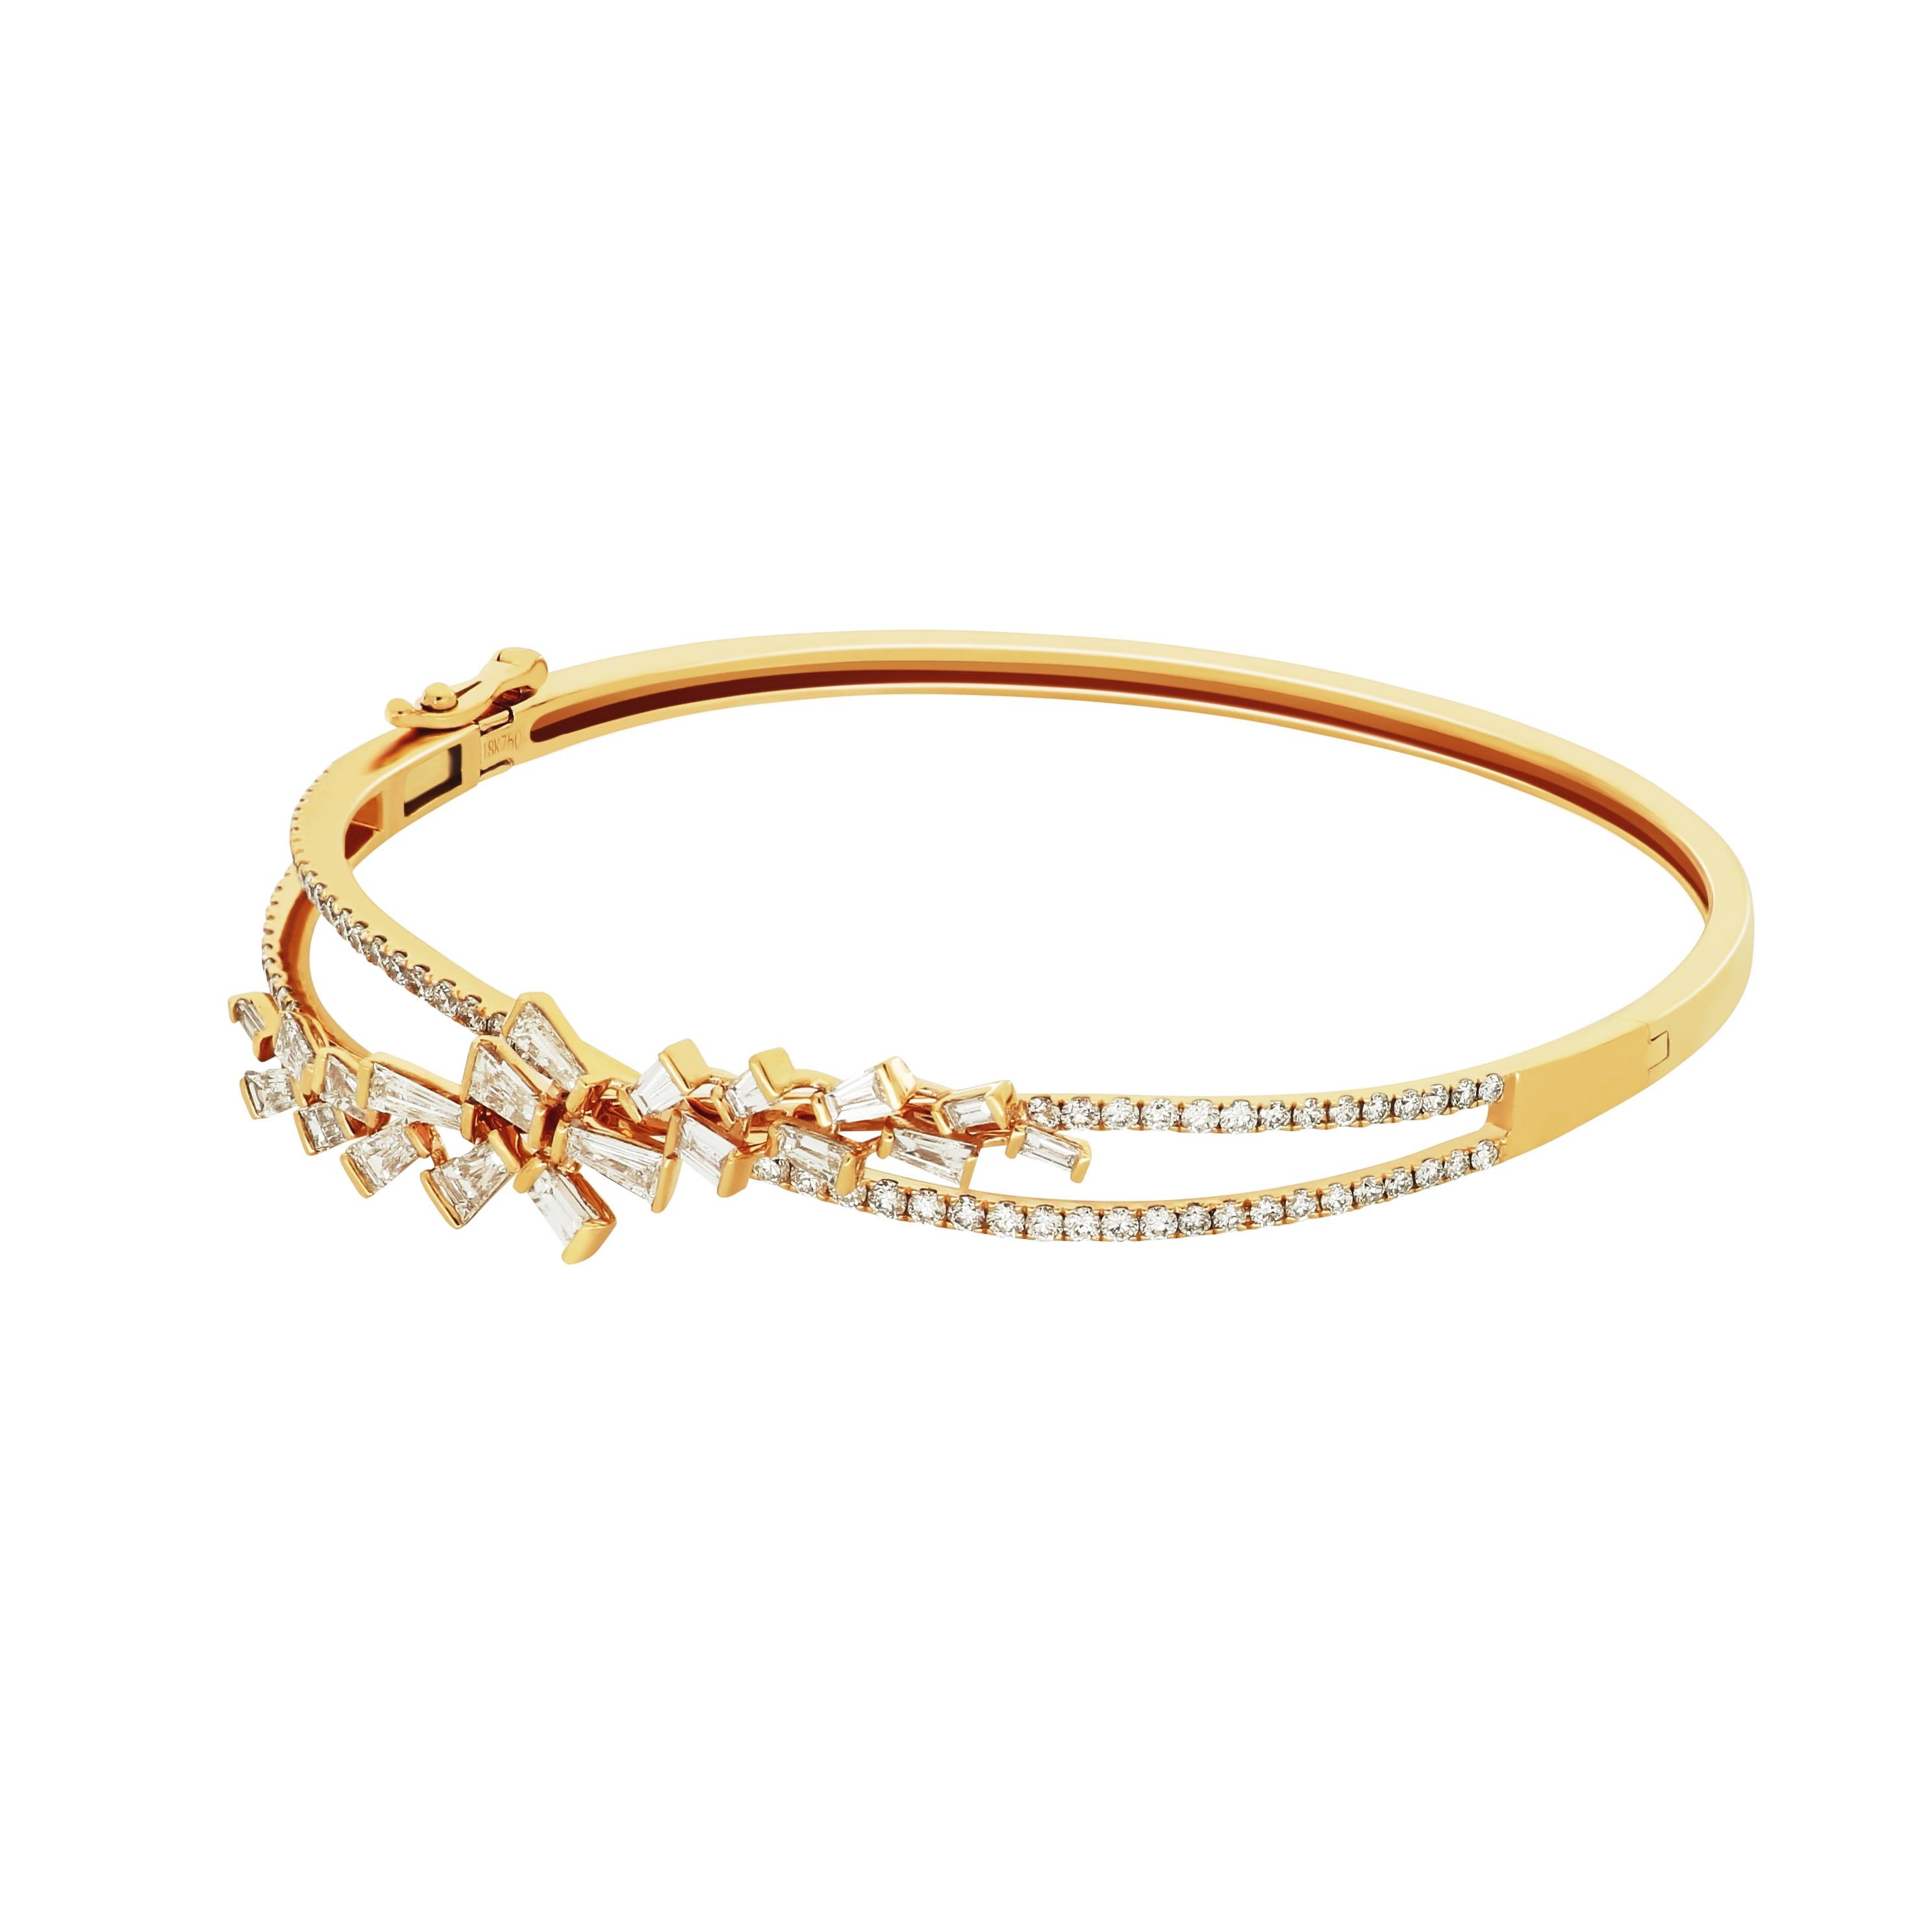 An eye-catching 18 karat rose gold bangle by Amwaj Jewellery that showcases the impeccable beauty of marquise shape diamonds, set within a minimal metal setting to allow their powerful radiance to emanate.
Diamonds (Total Carat Weight: 1.8 ct) 
18